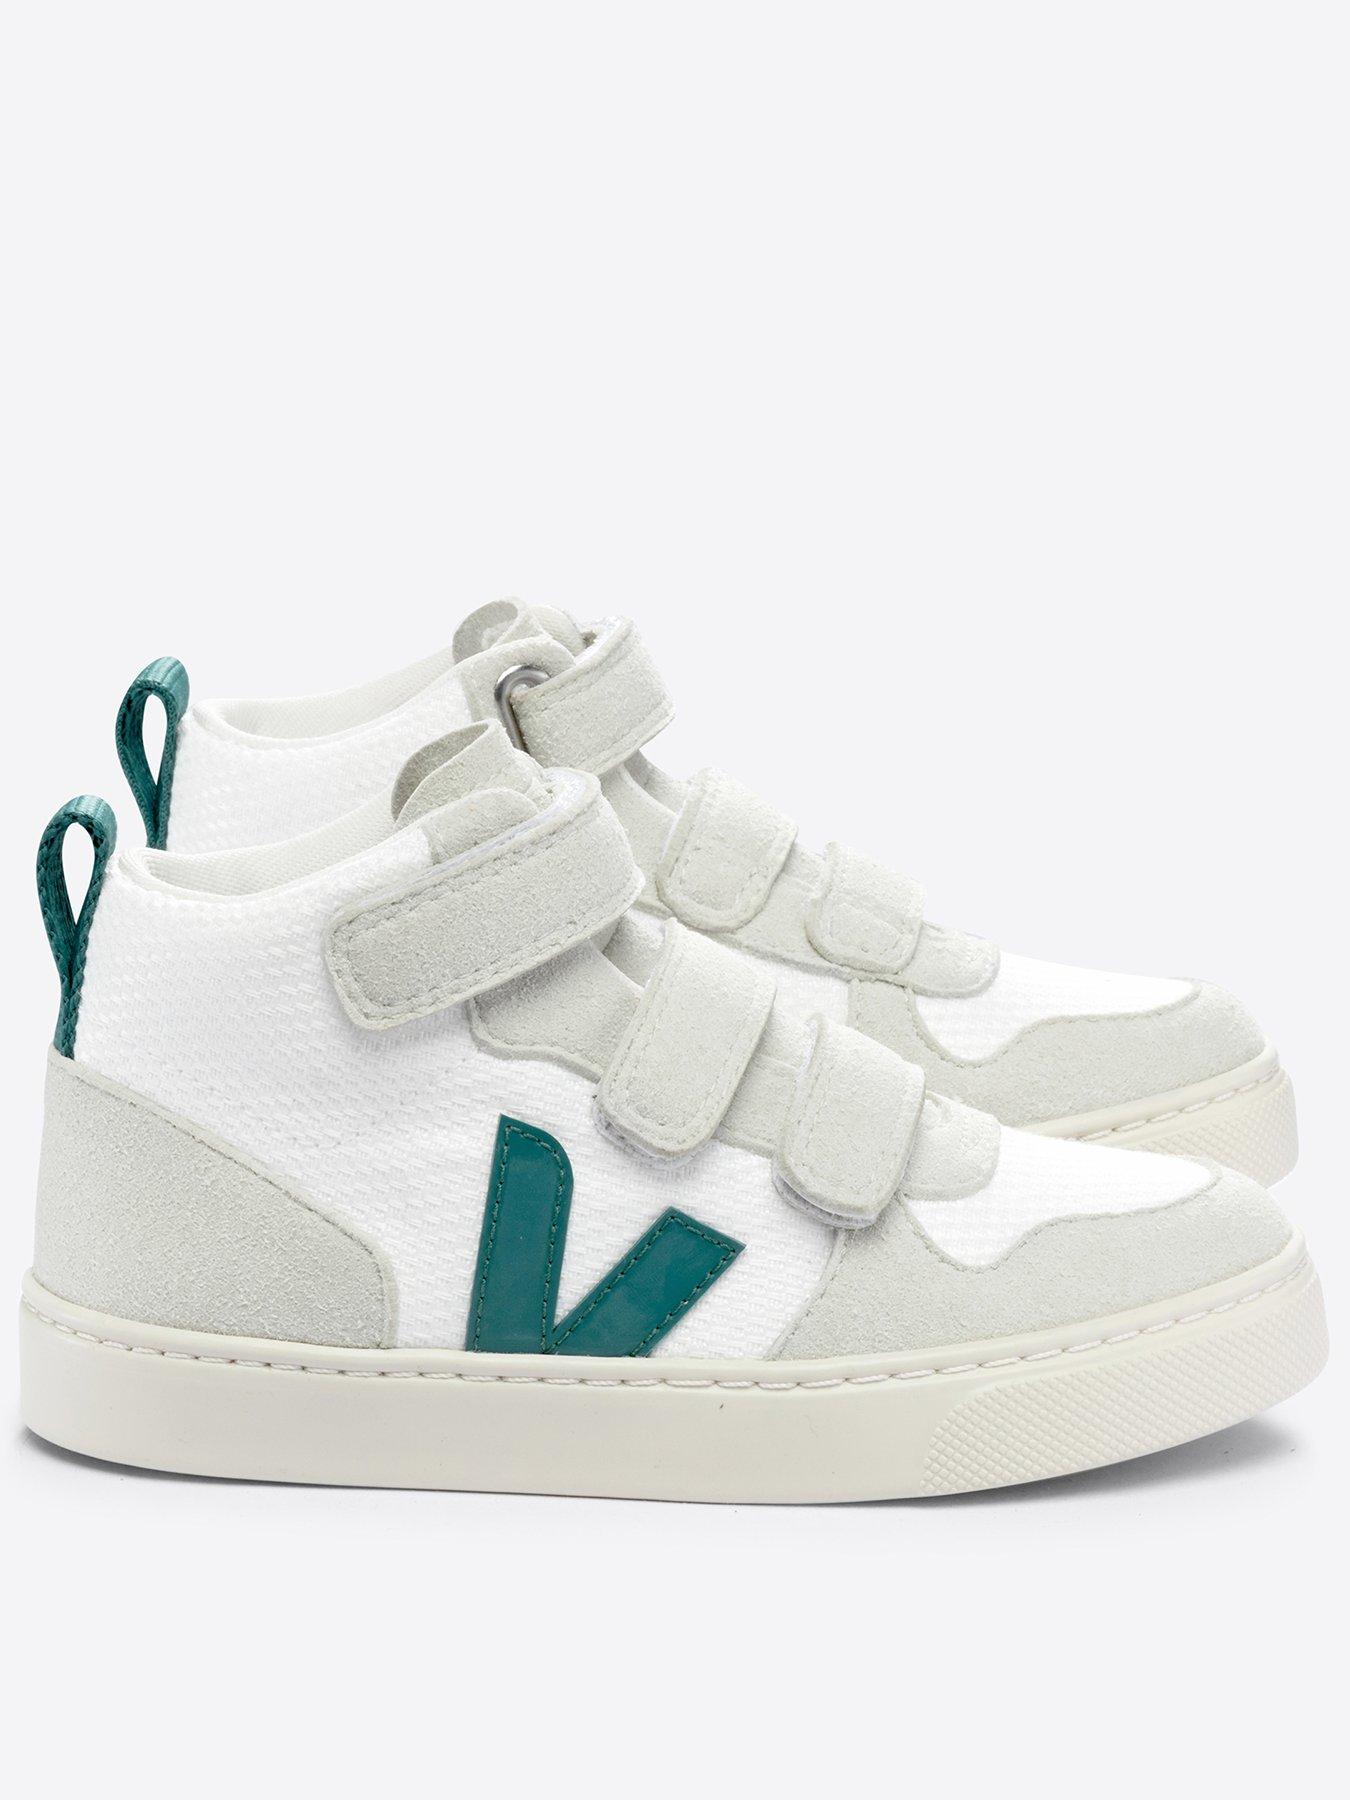 Kid's V-10 Mid Trainers - Green/Grey